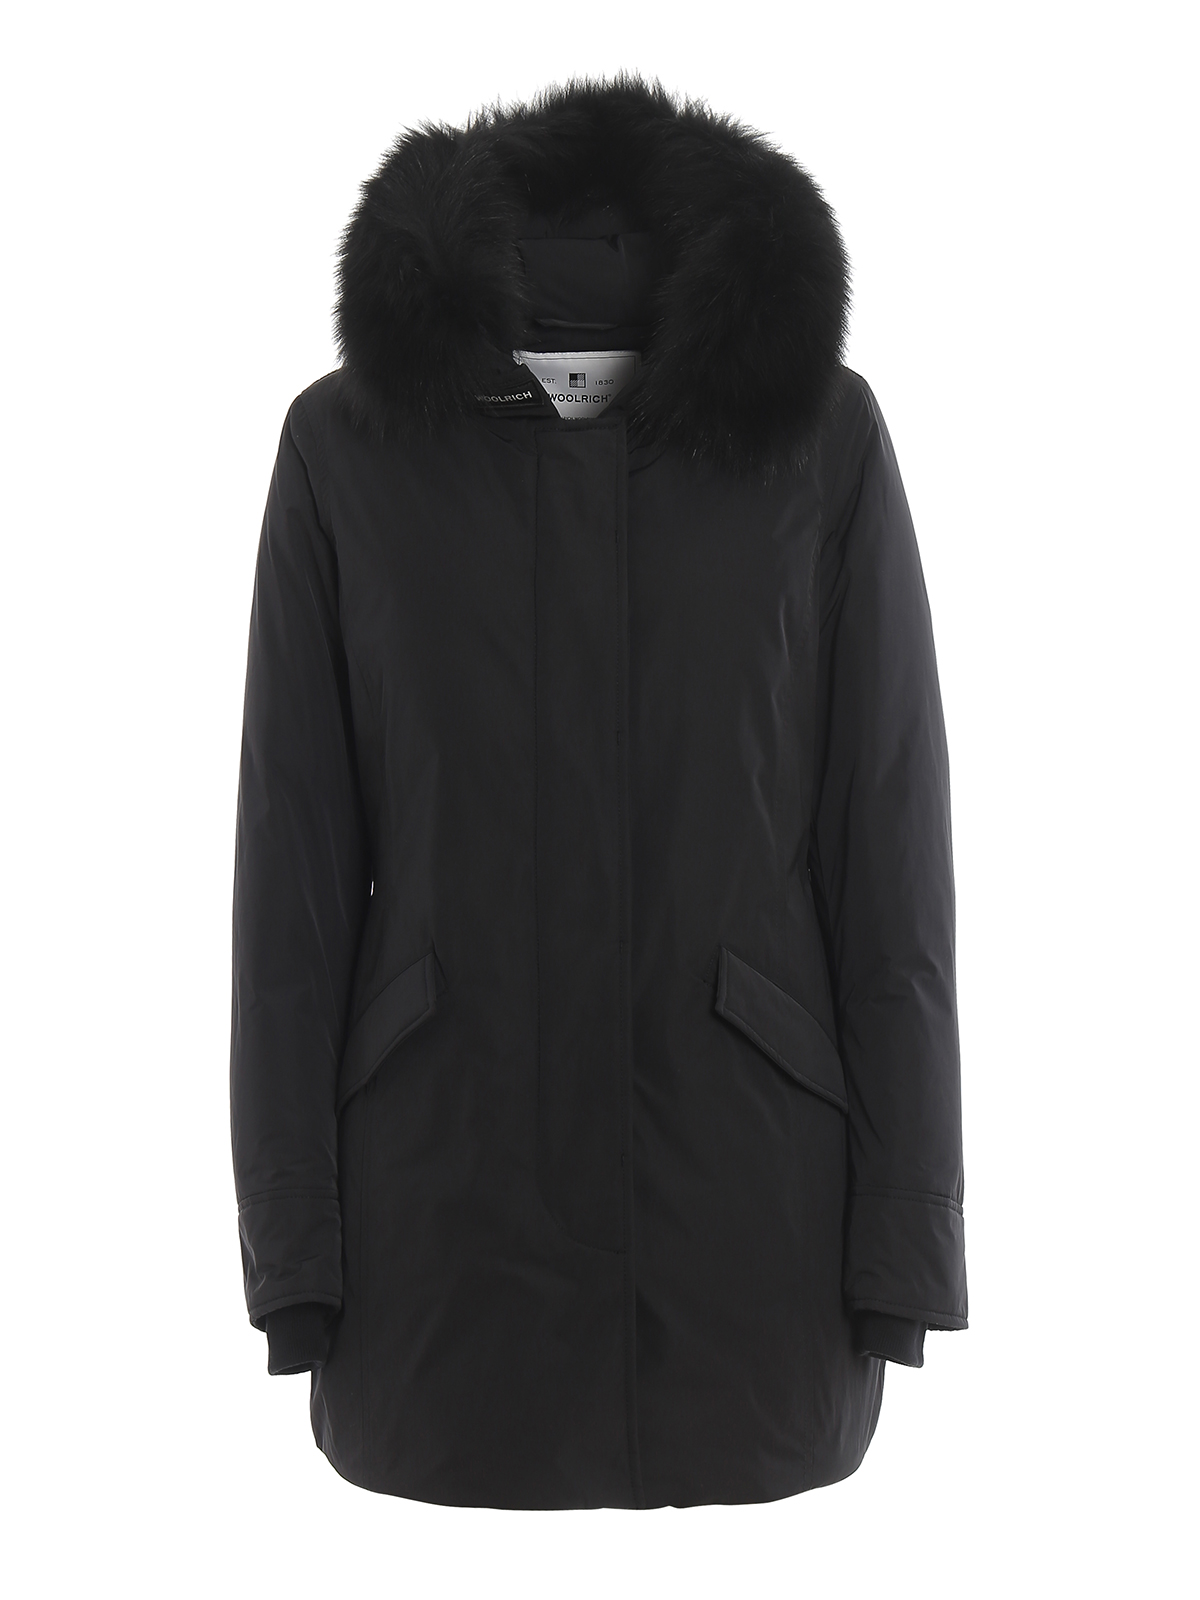 Downtown inrichting Cerebrum Padded coats Woolrich - Black Luxury Arctic Parka - WWCPS2834UT0573100